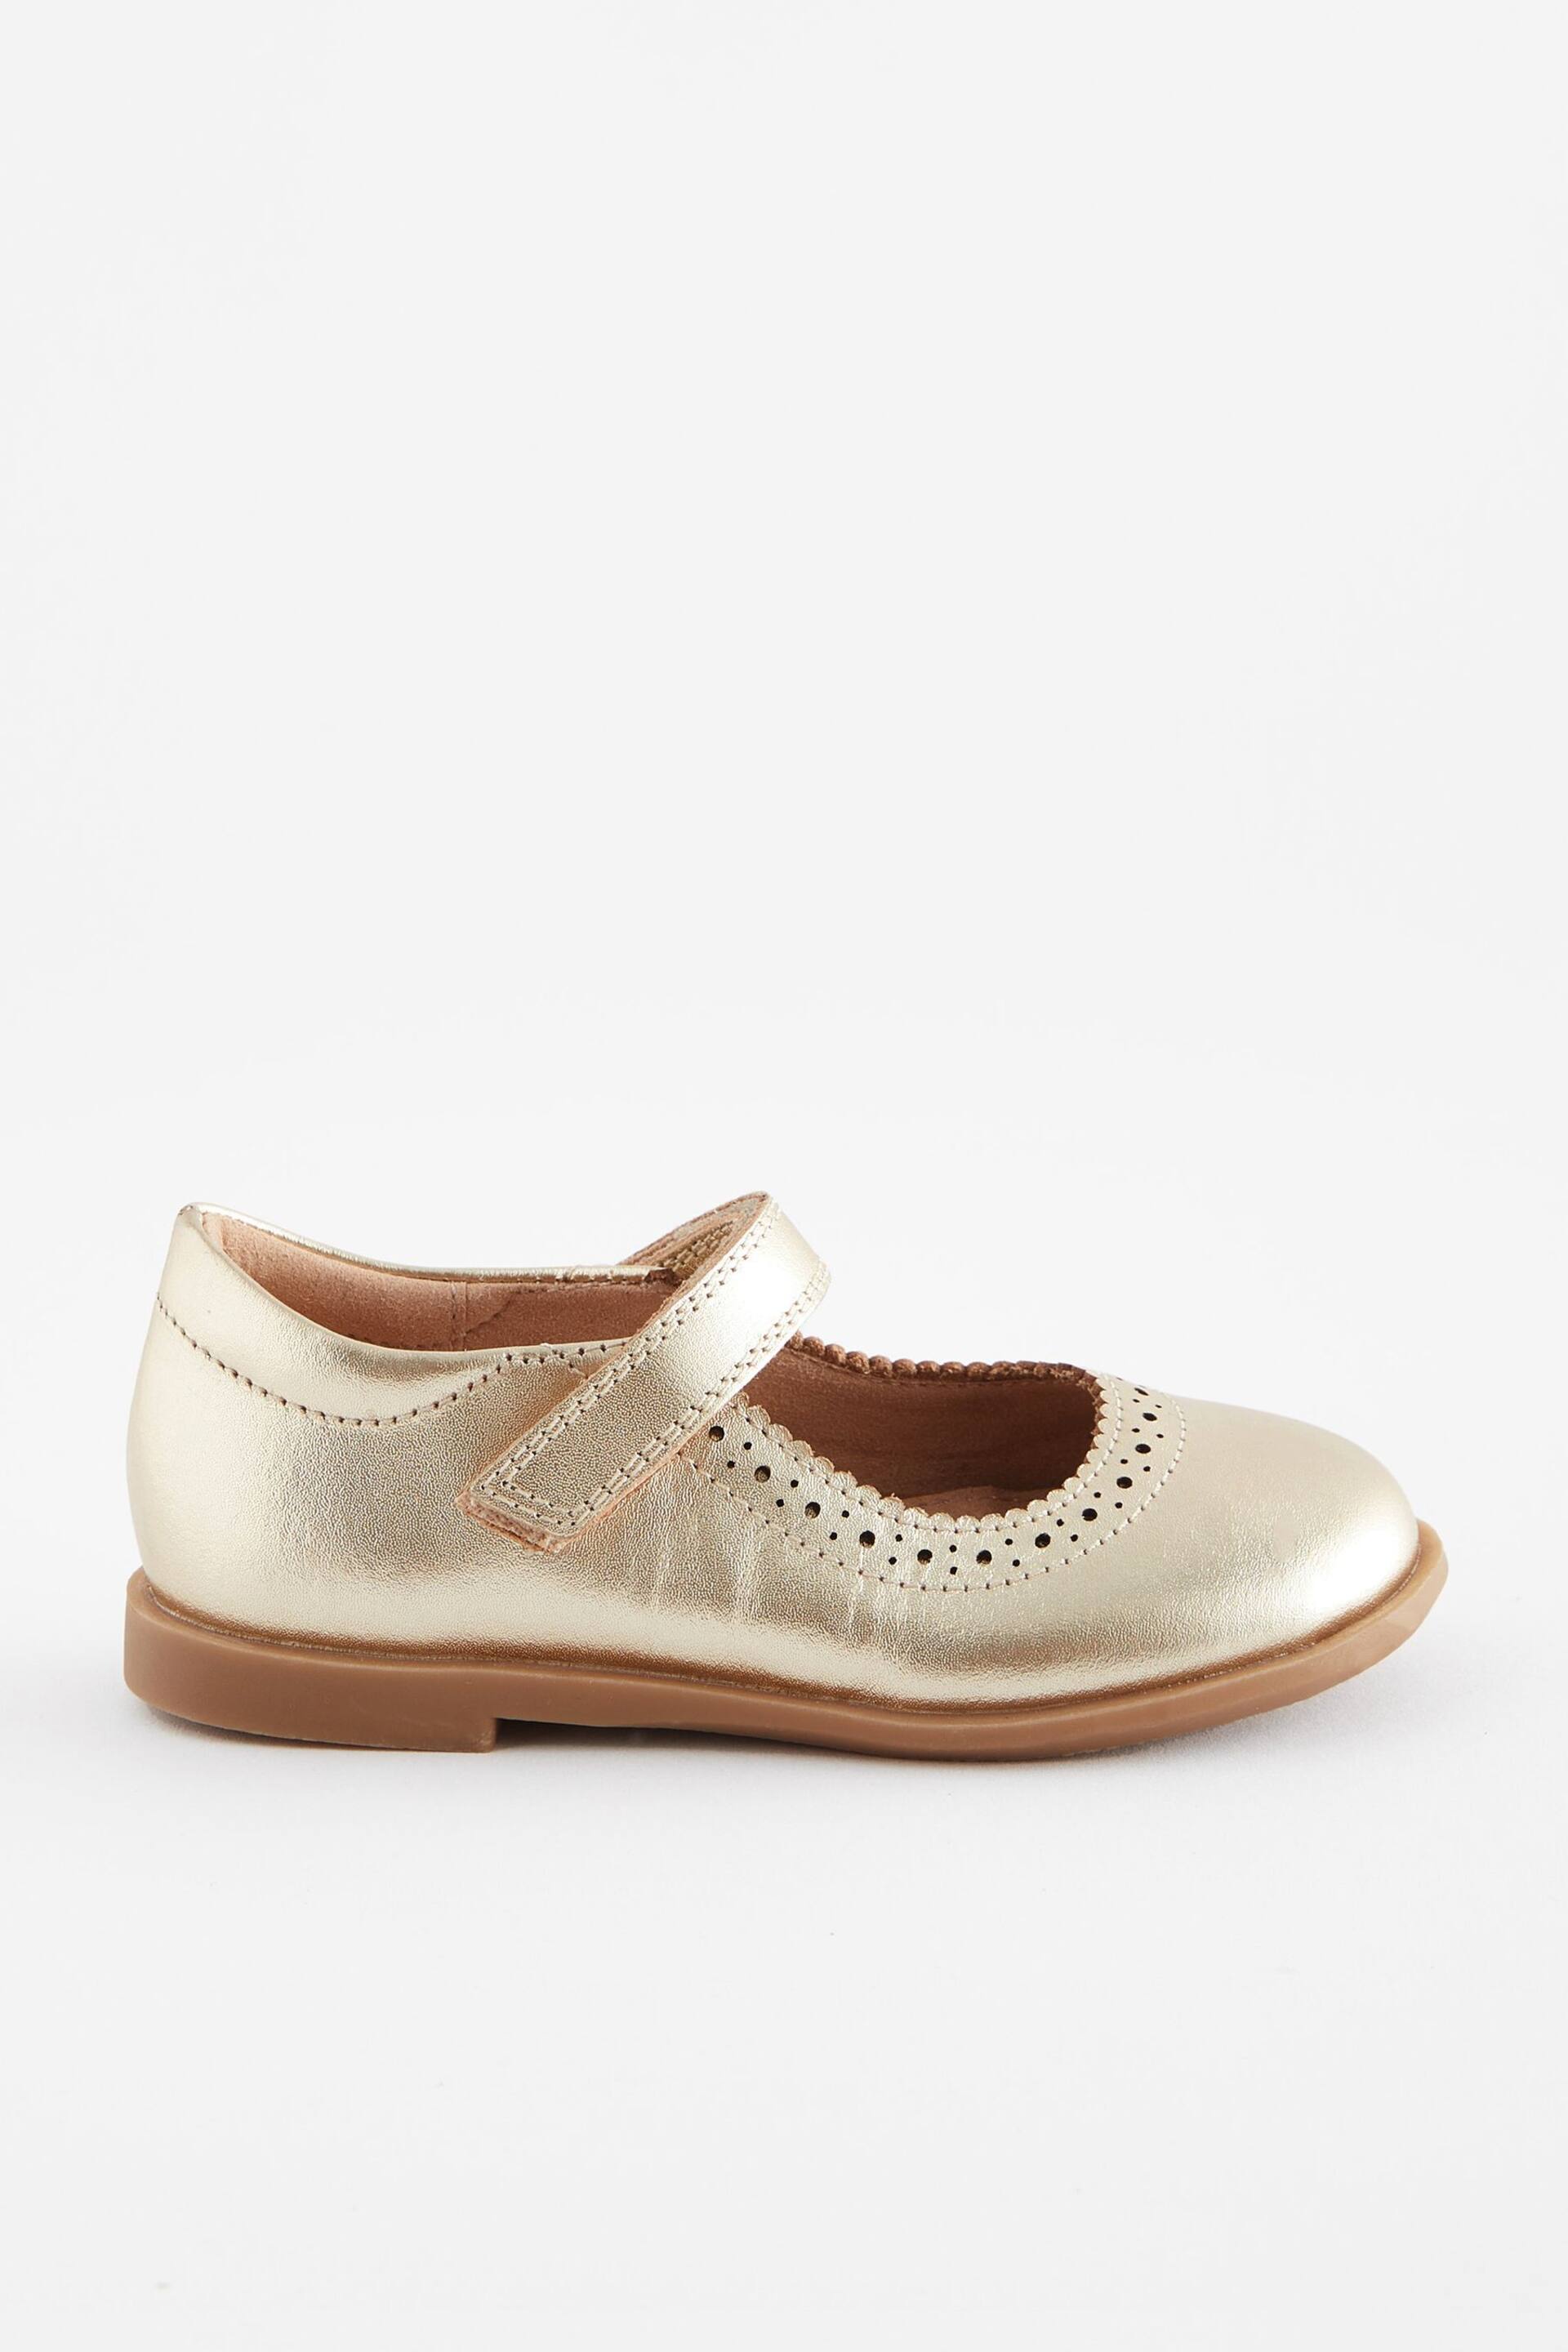 Gold Leather Leather Mary Jane Brogues - Image 2 of 5